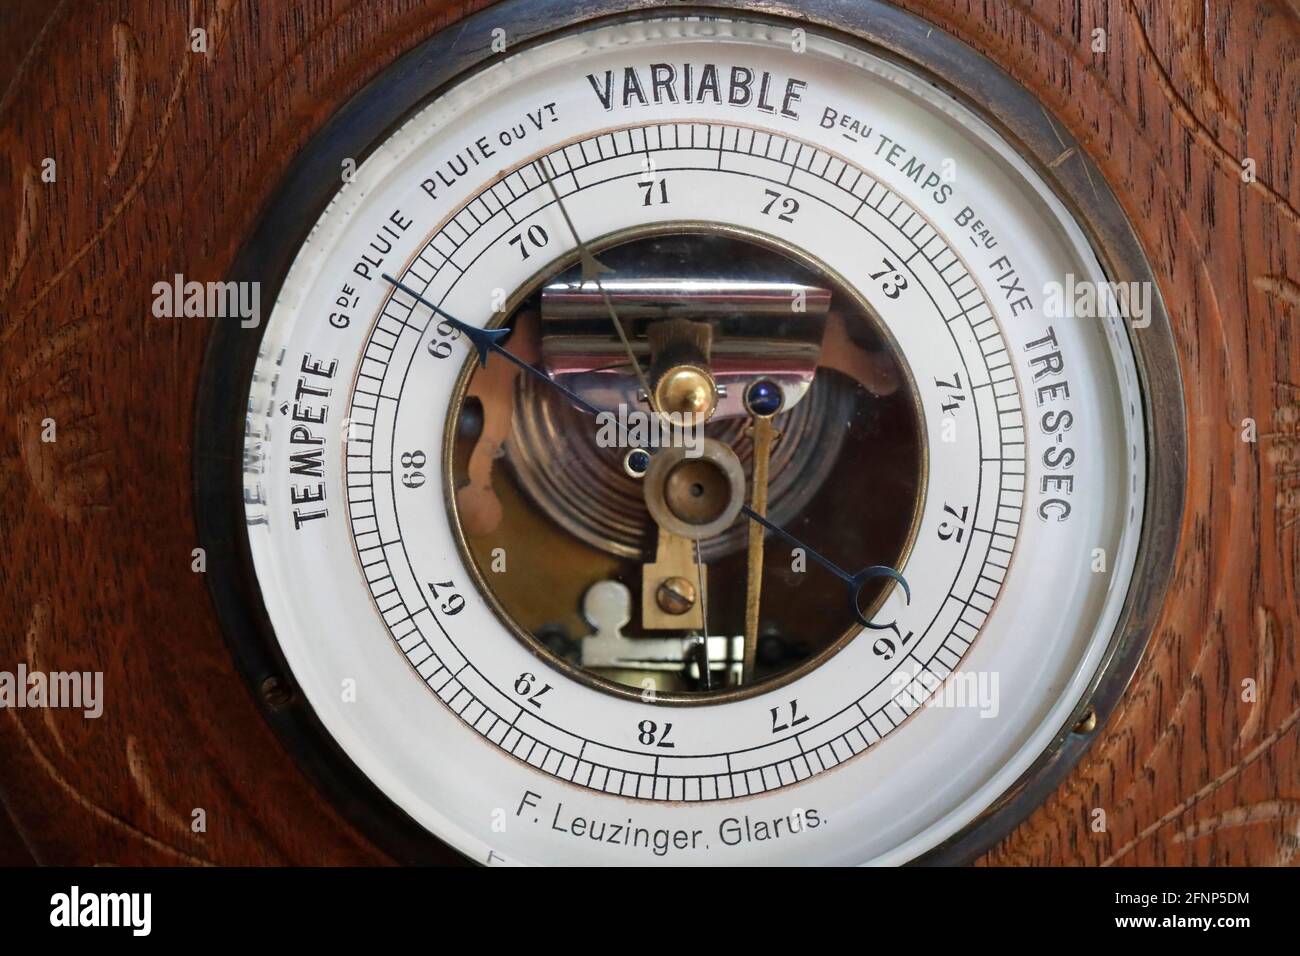 A barometer used for weather forecasting measuring the barometric pressure.  France. Stock Photo